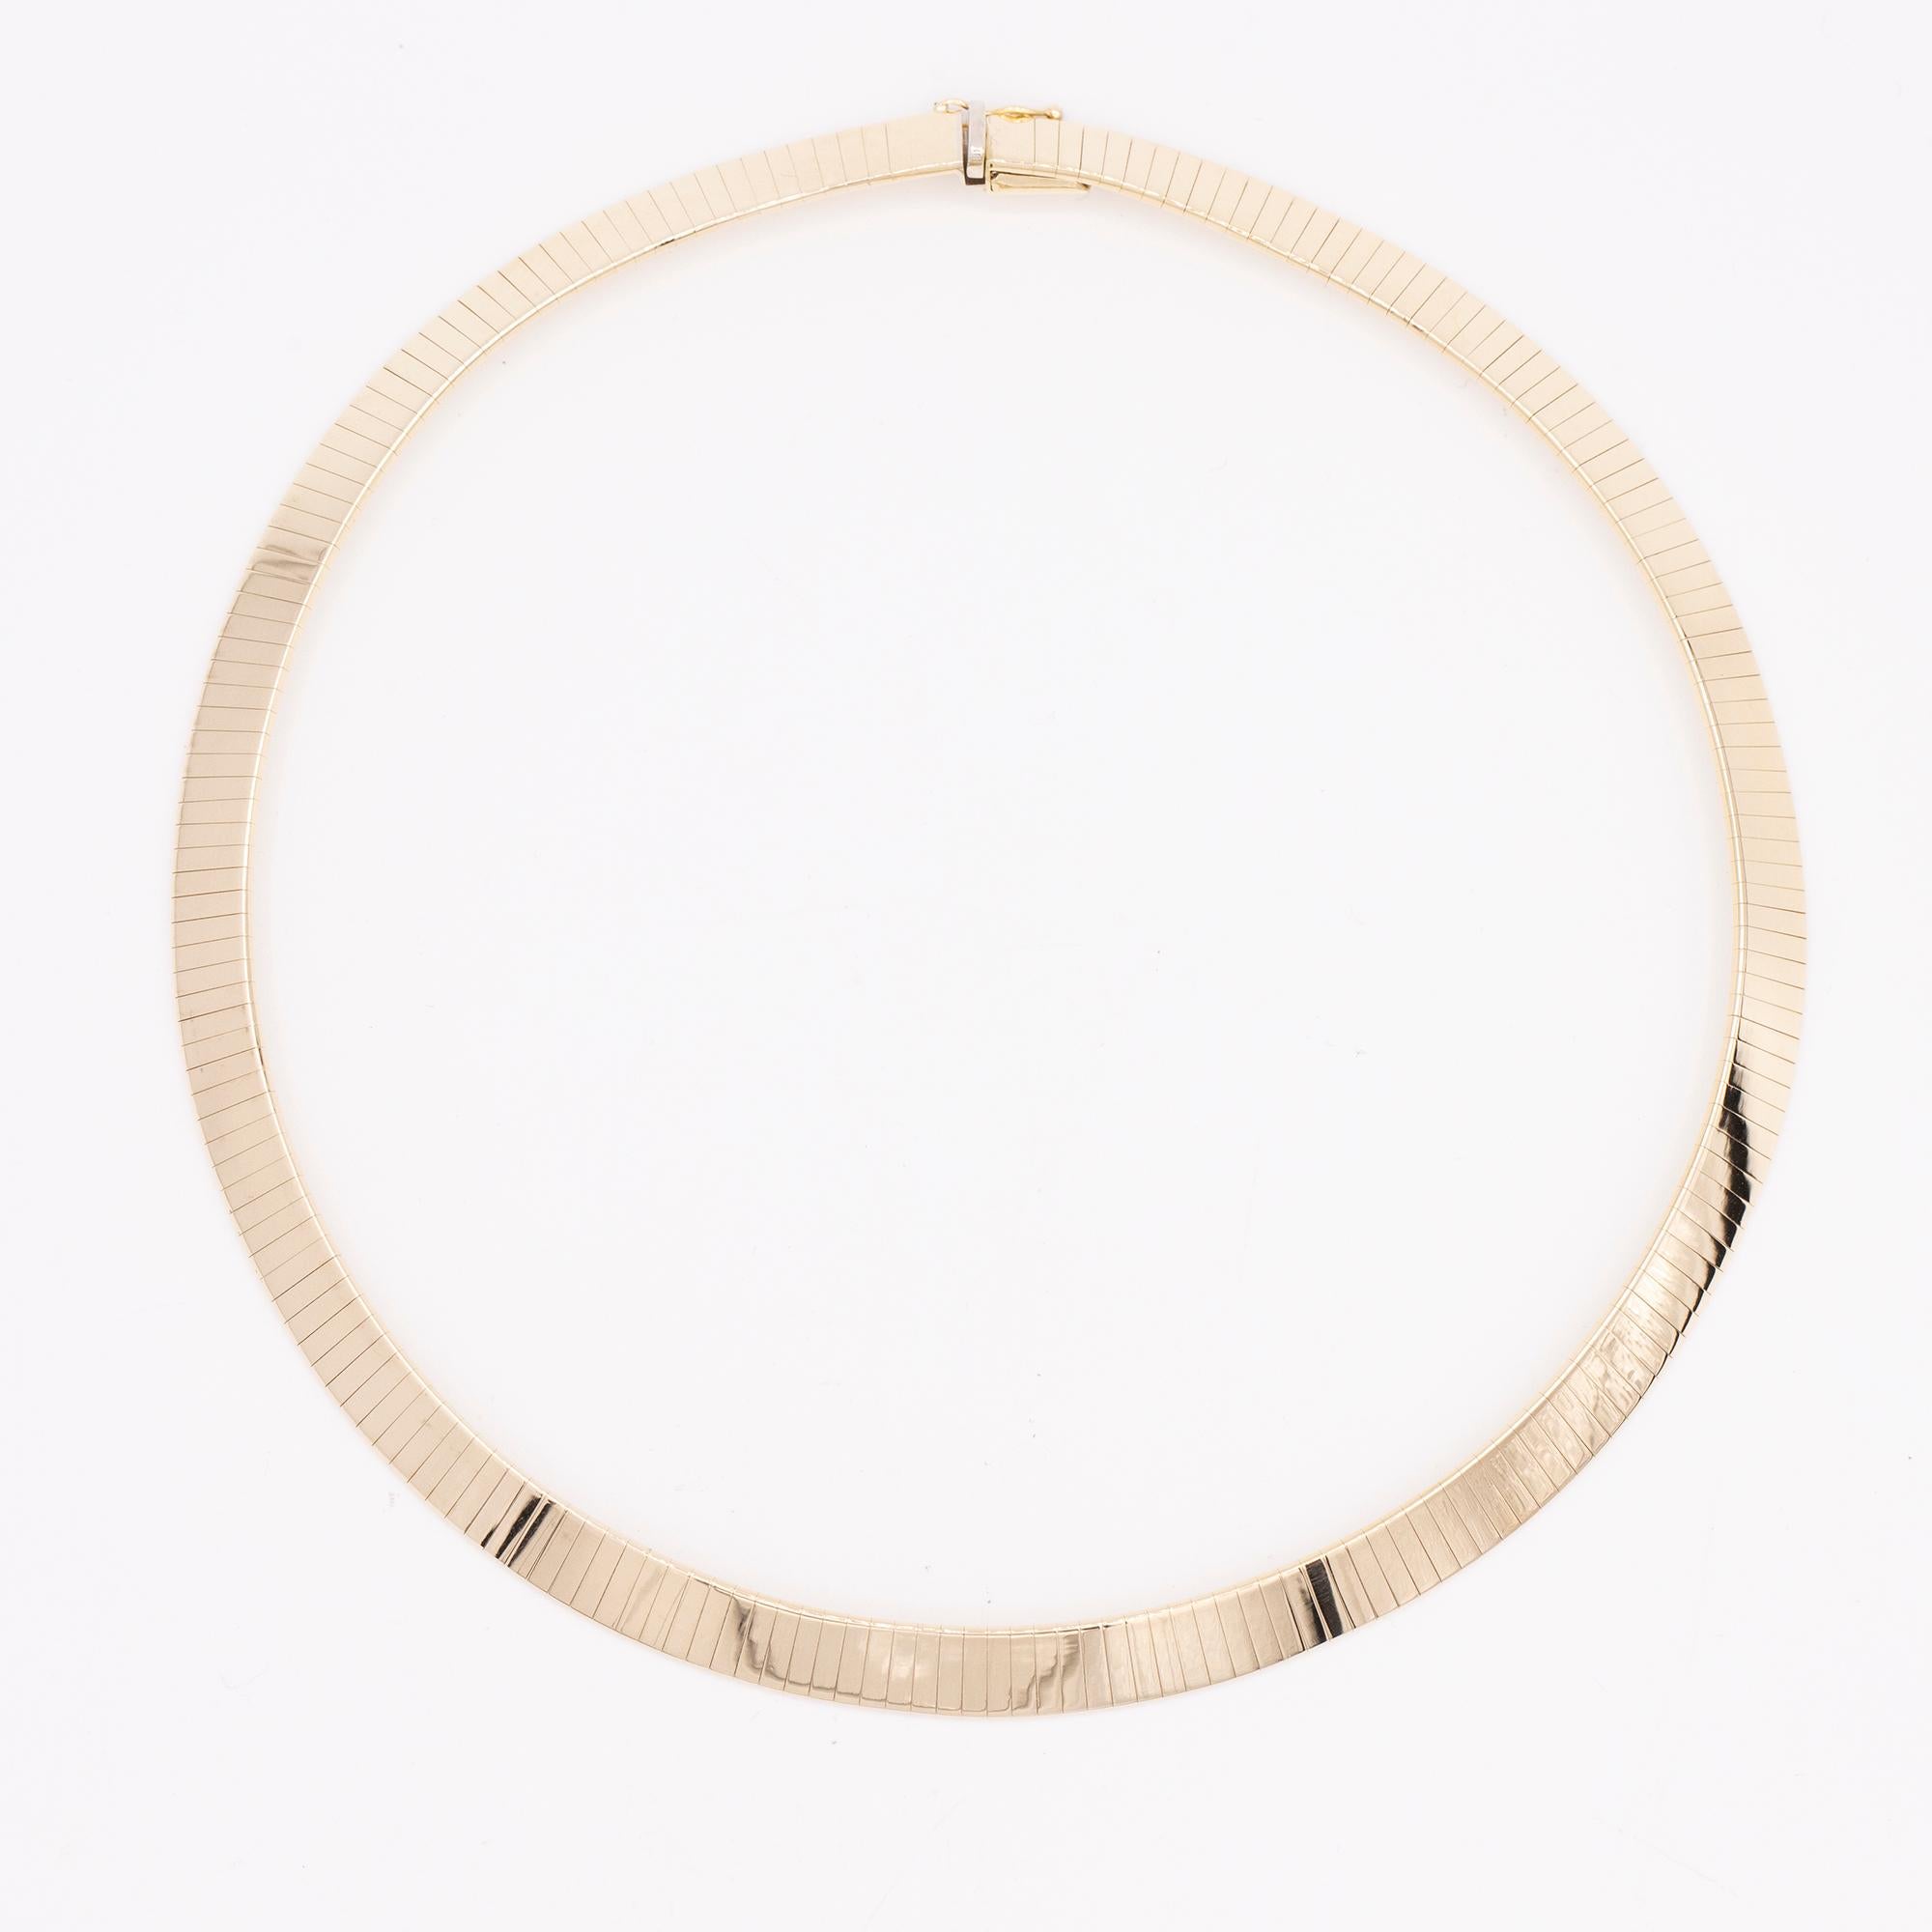 14kt yellow gold Omega flat necklace. The necklace is 8mm in width and 16